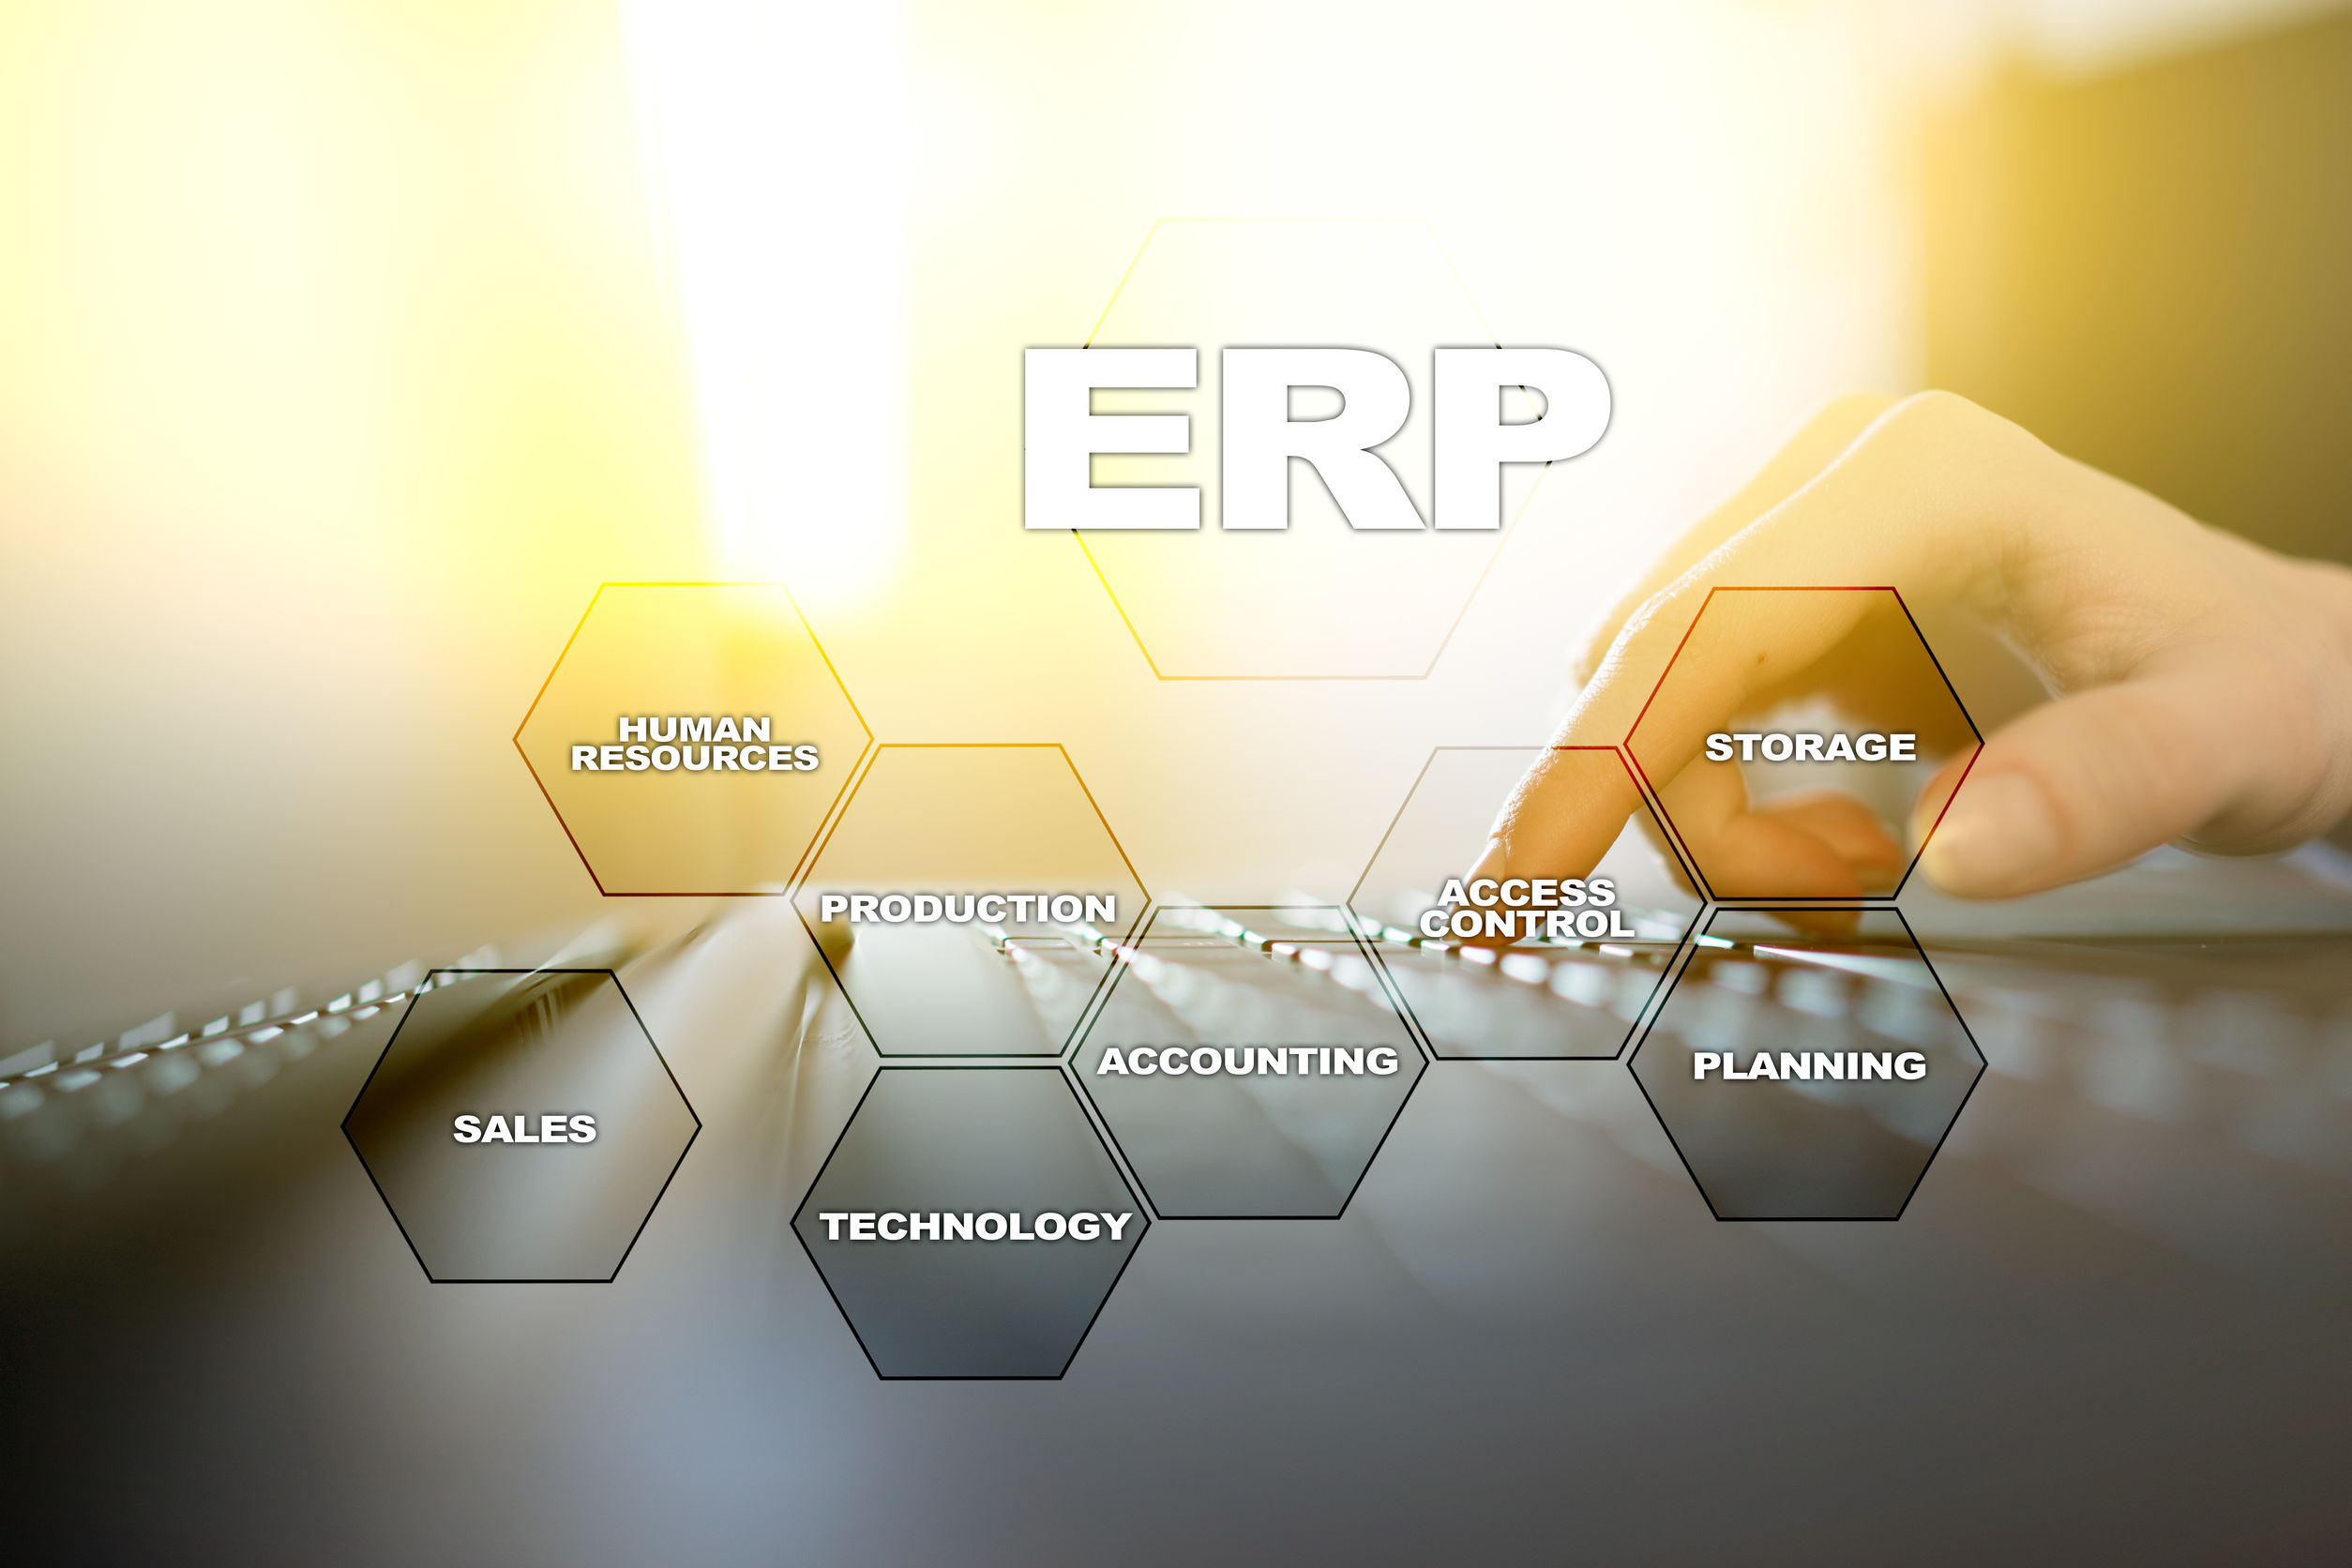 7 Tips for Selecting a New Enterprise Software Solution